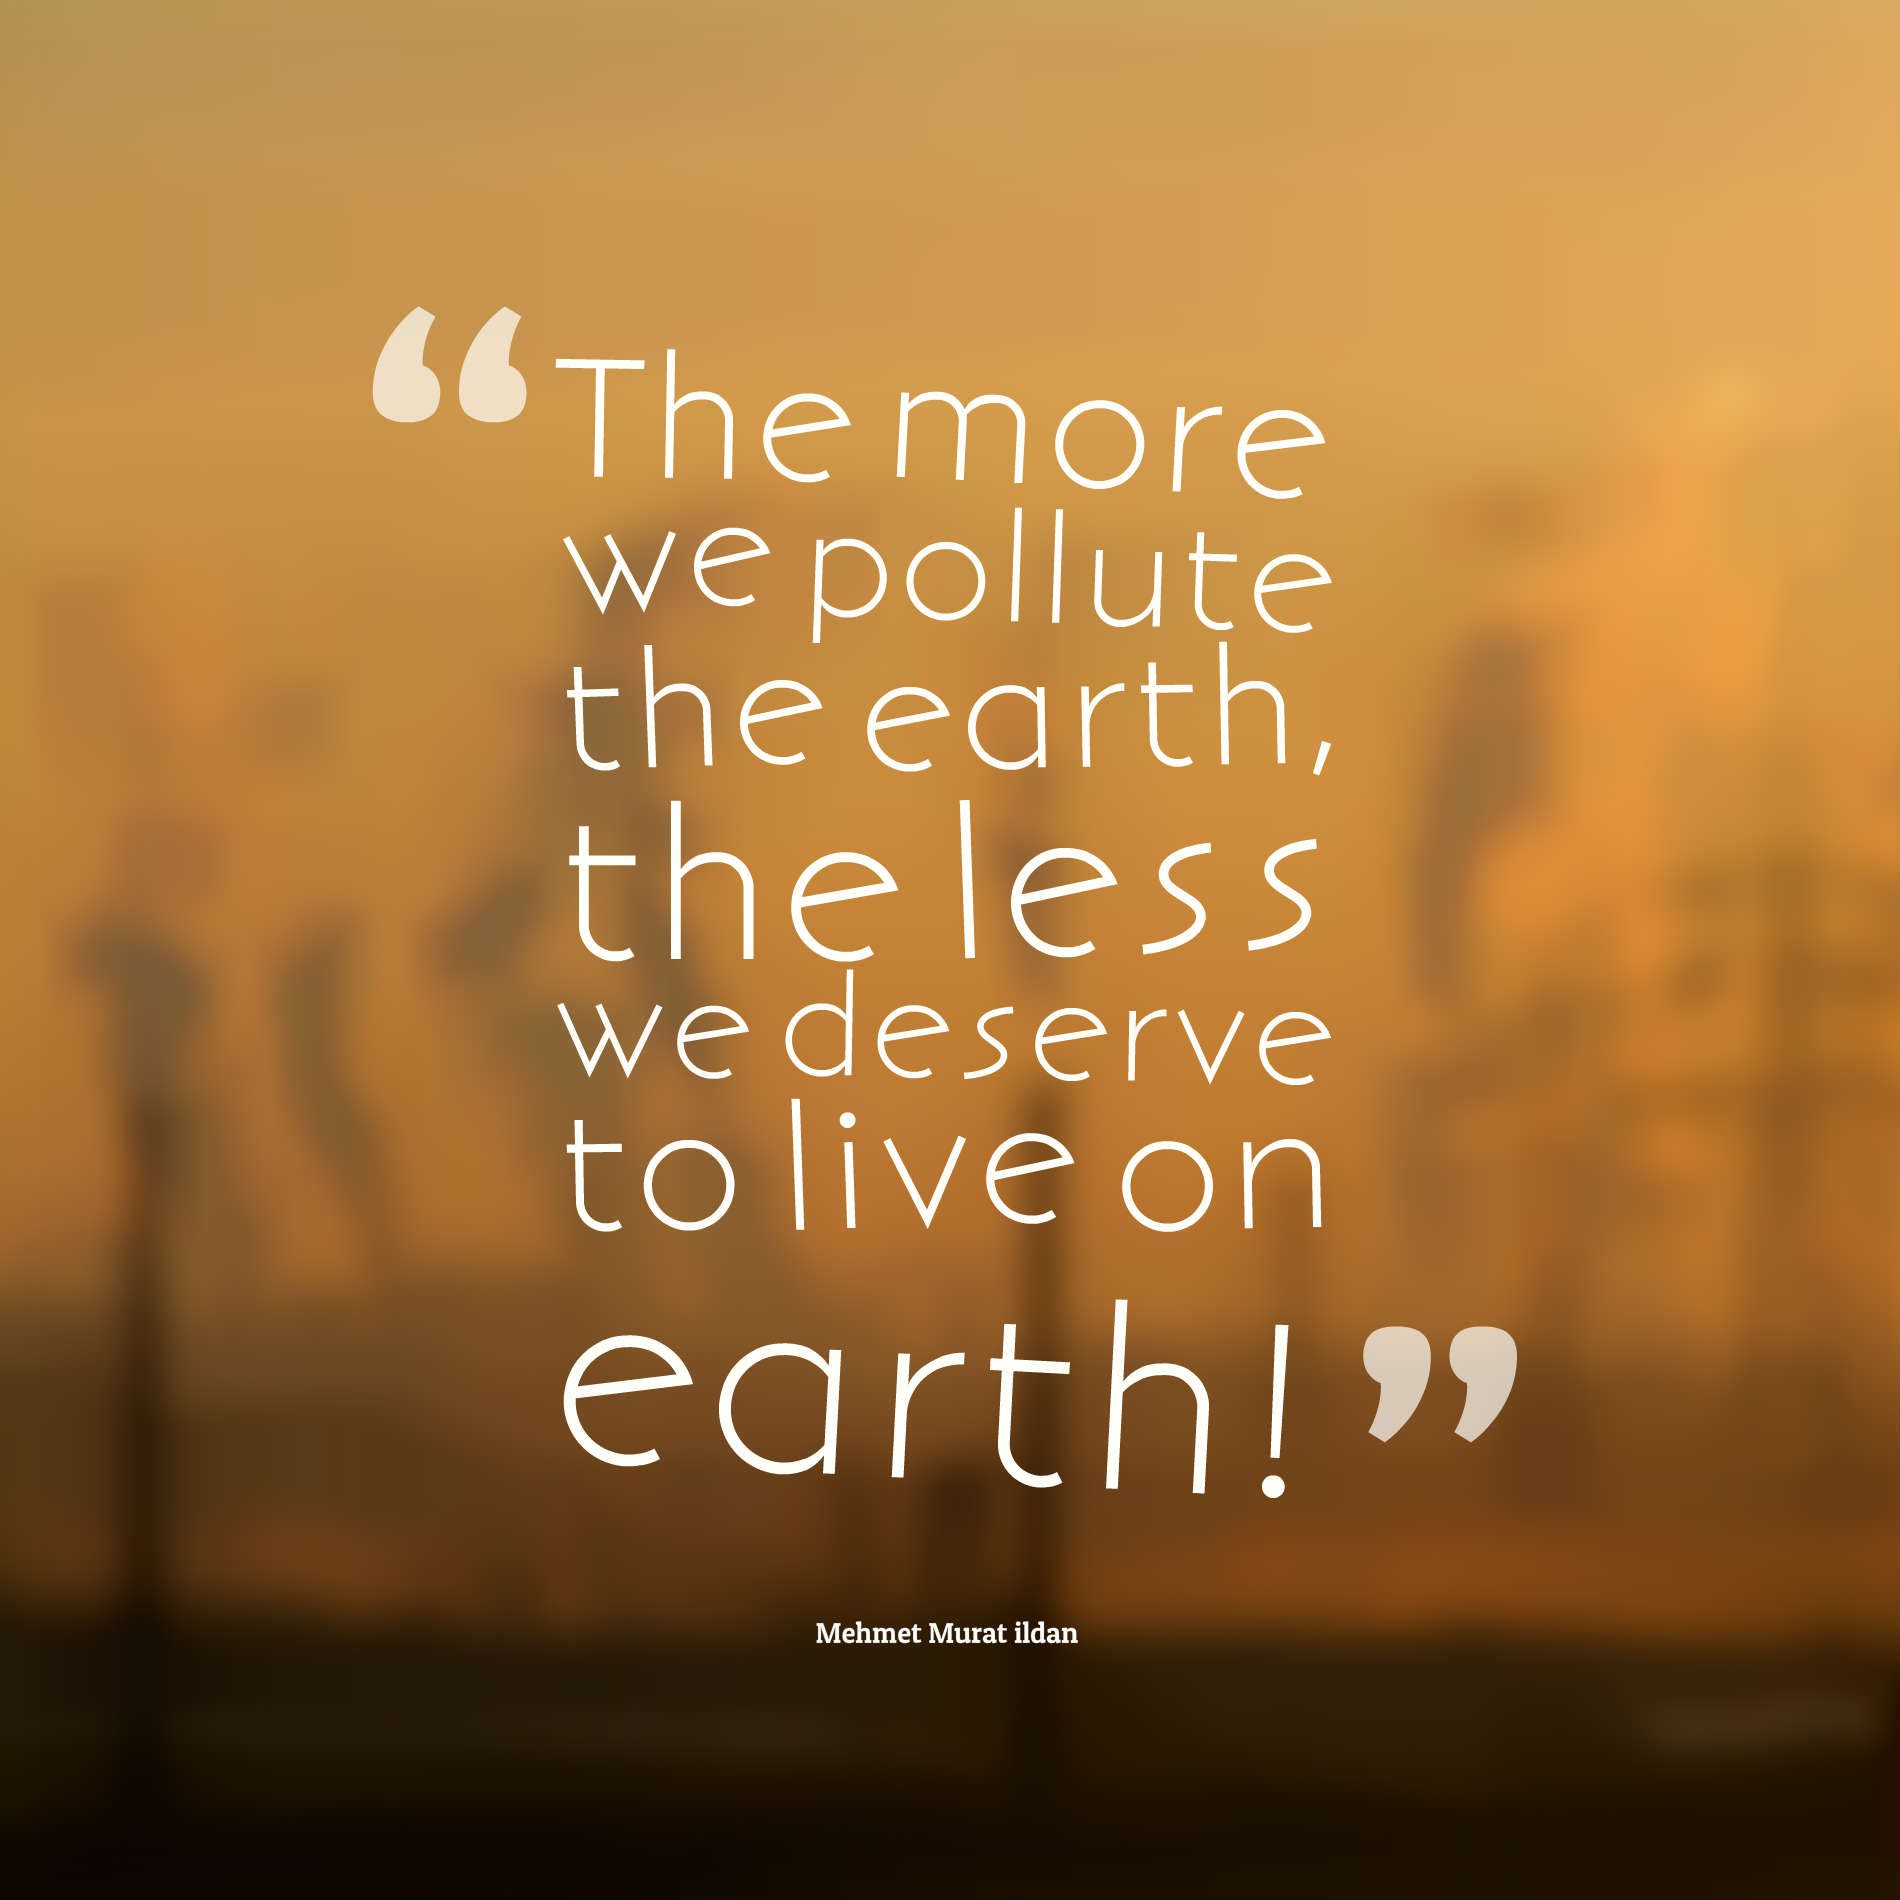 The more we pollute the earth, the less we deserve to live on earth!